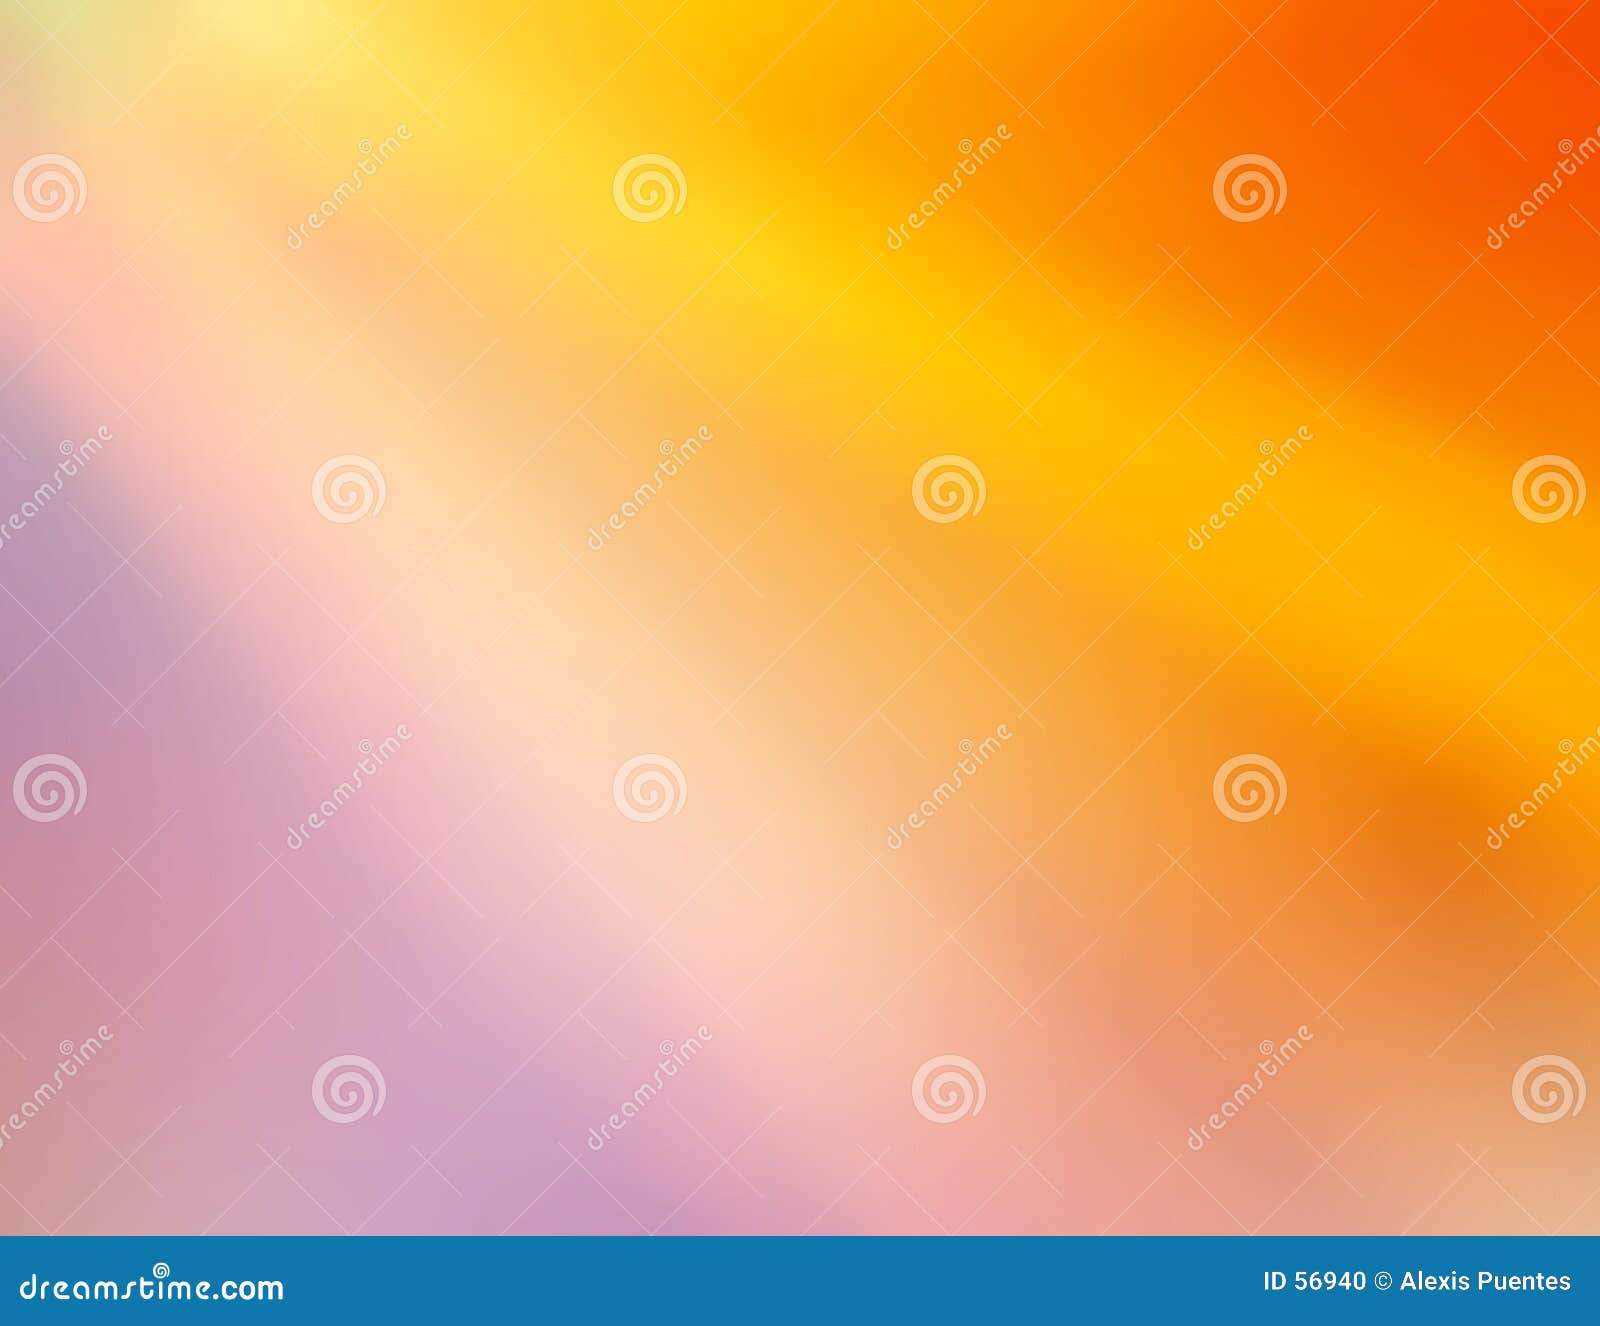 Abstract background stock illustration. Illustration of concept - 56940